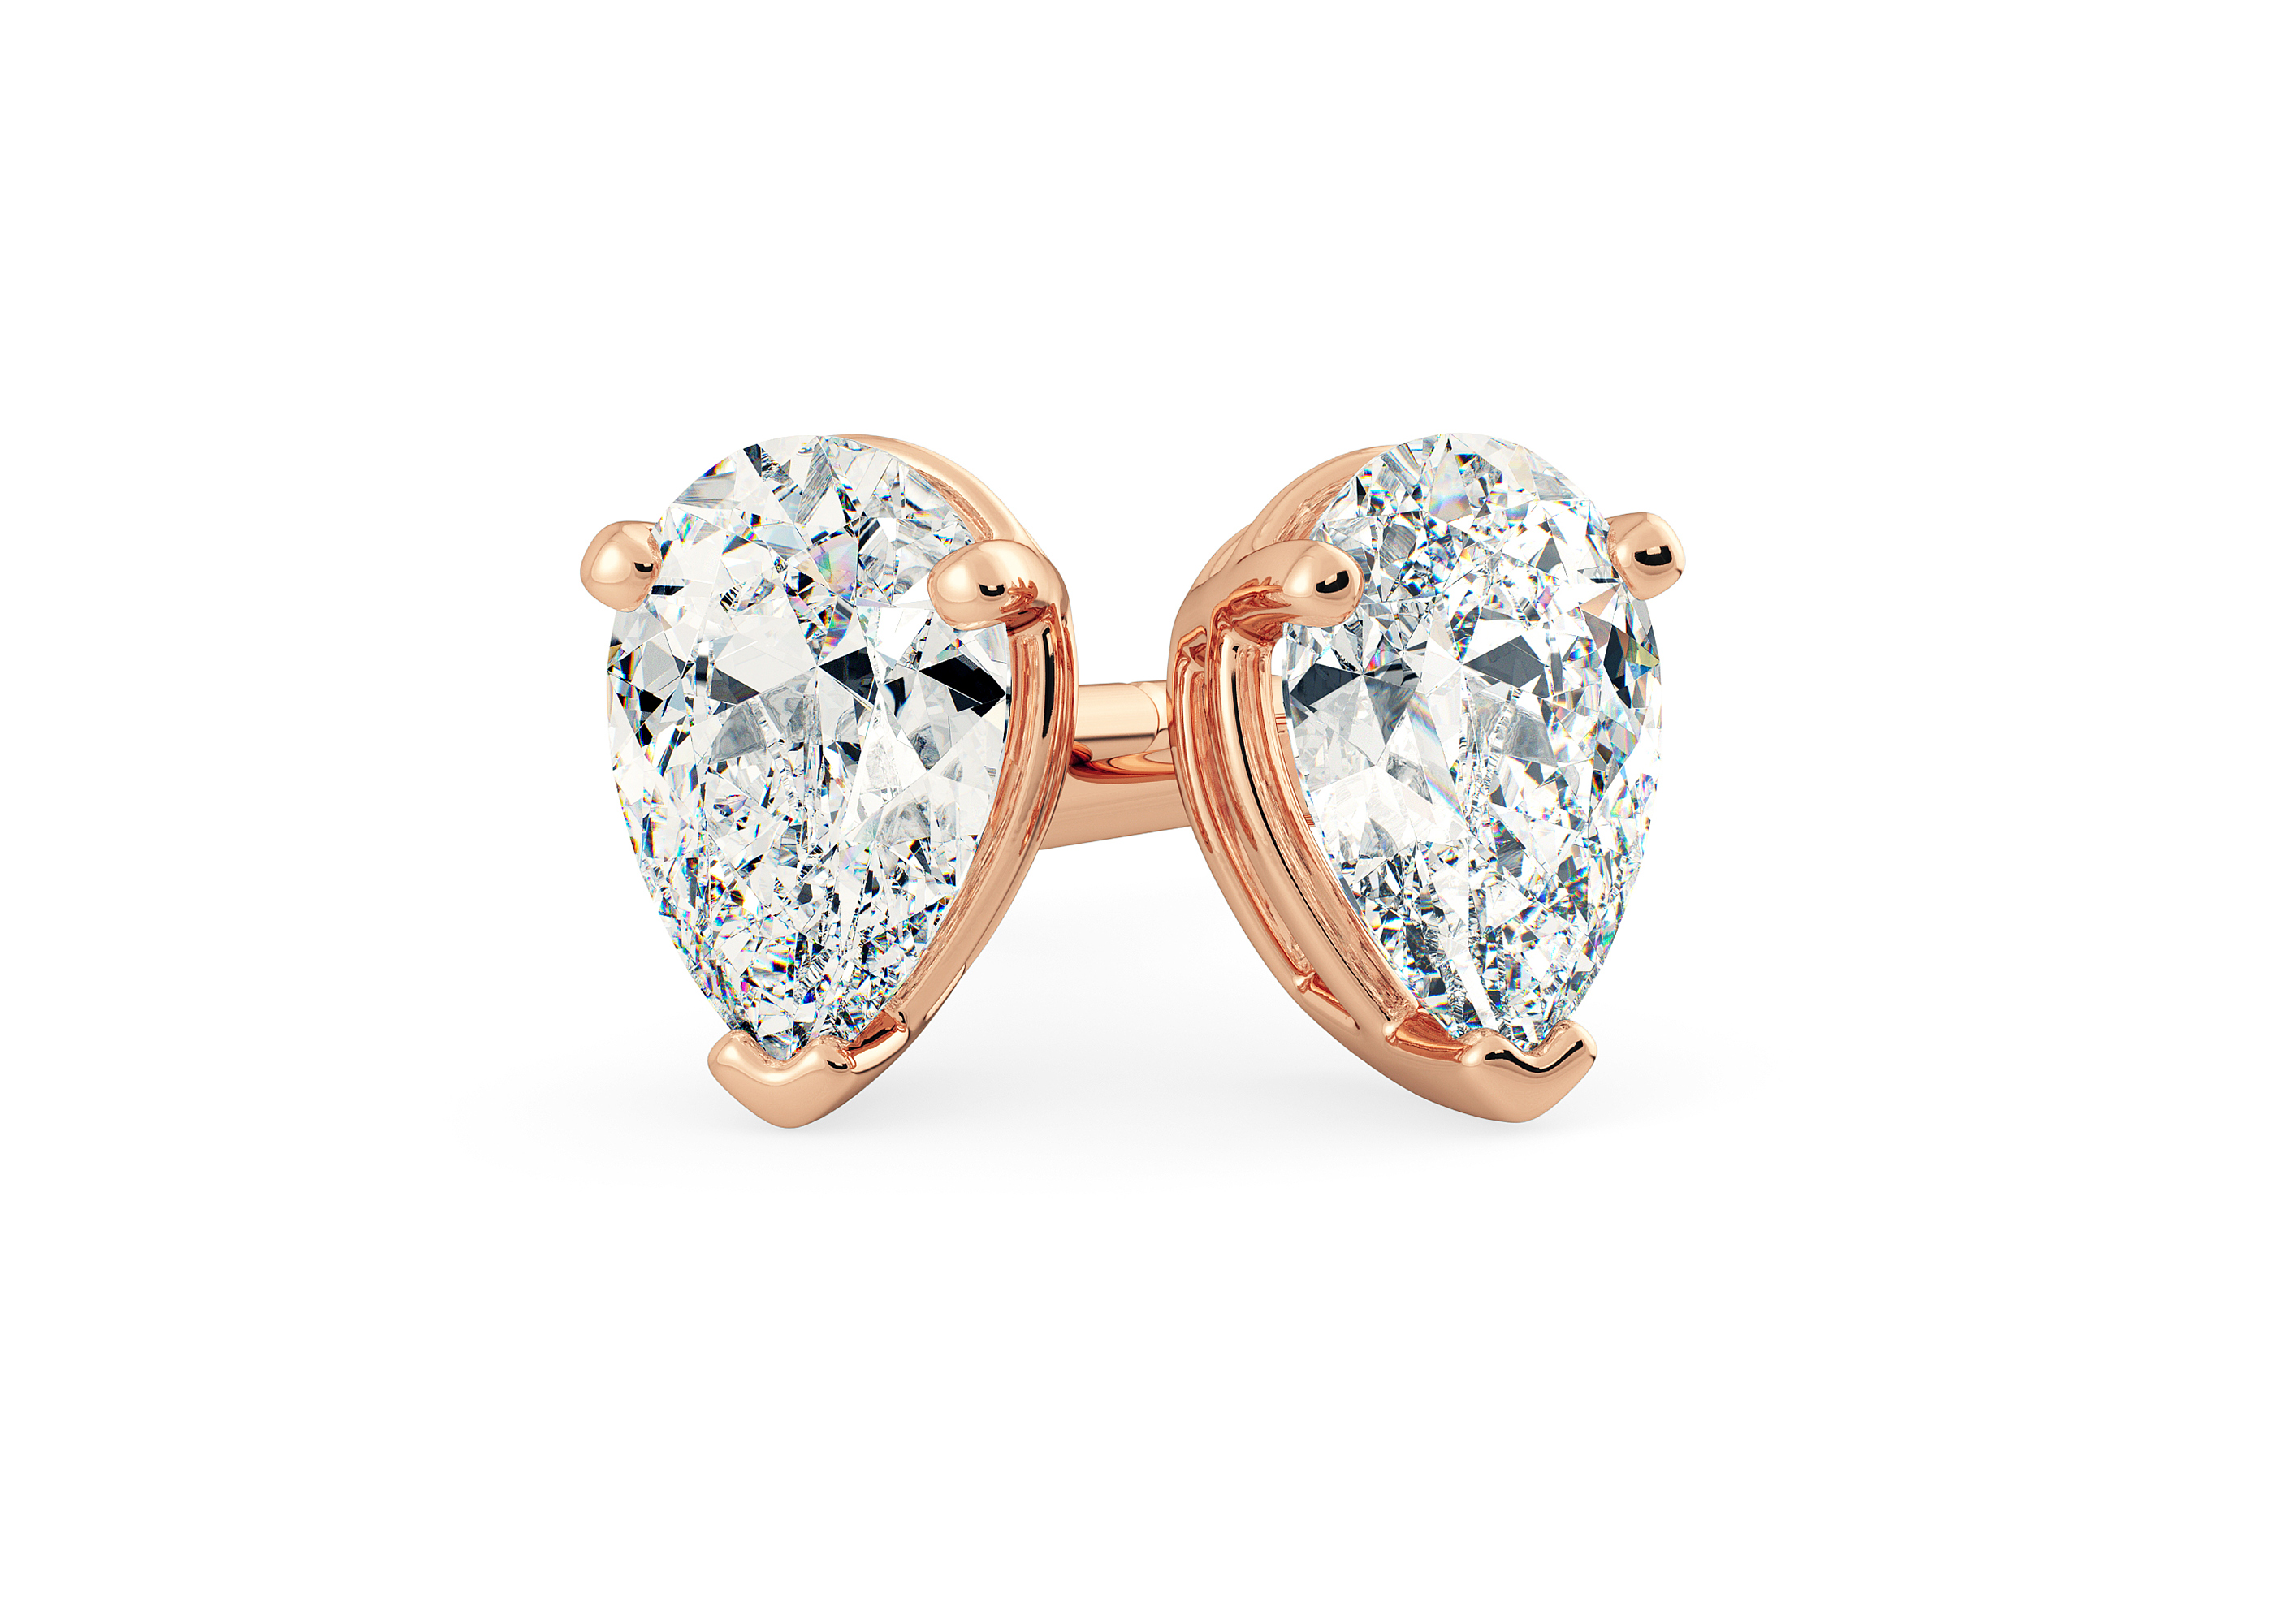 Two Carat Round Brilliant Diamond Stud Earrings in 18K Rose Gold